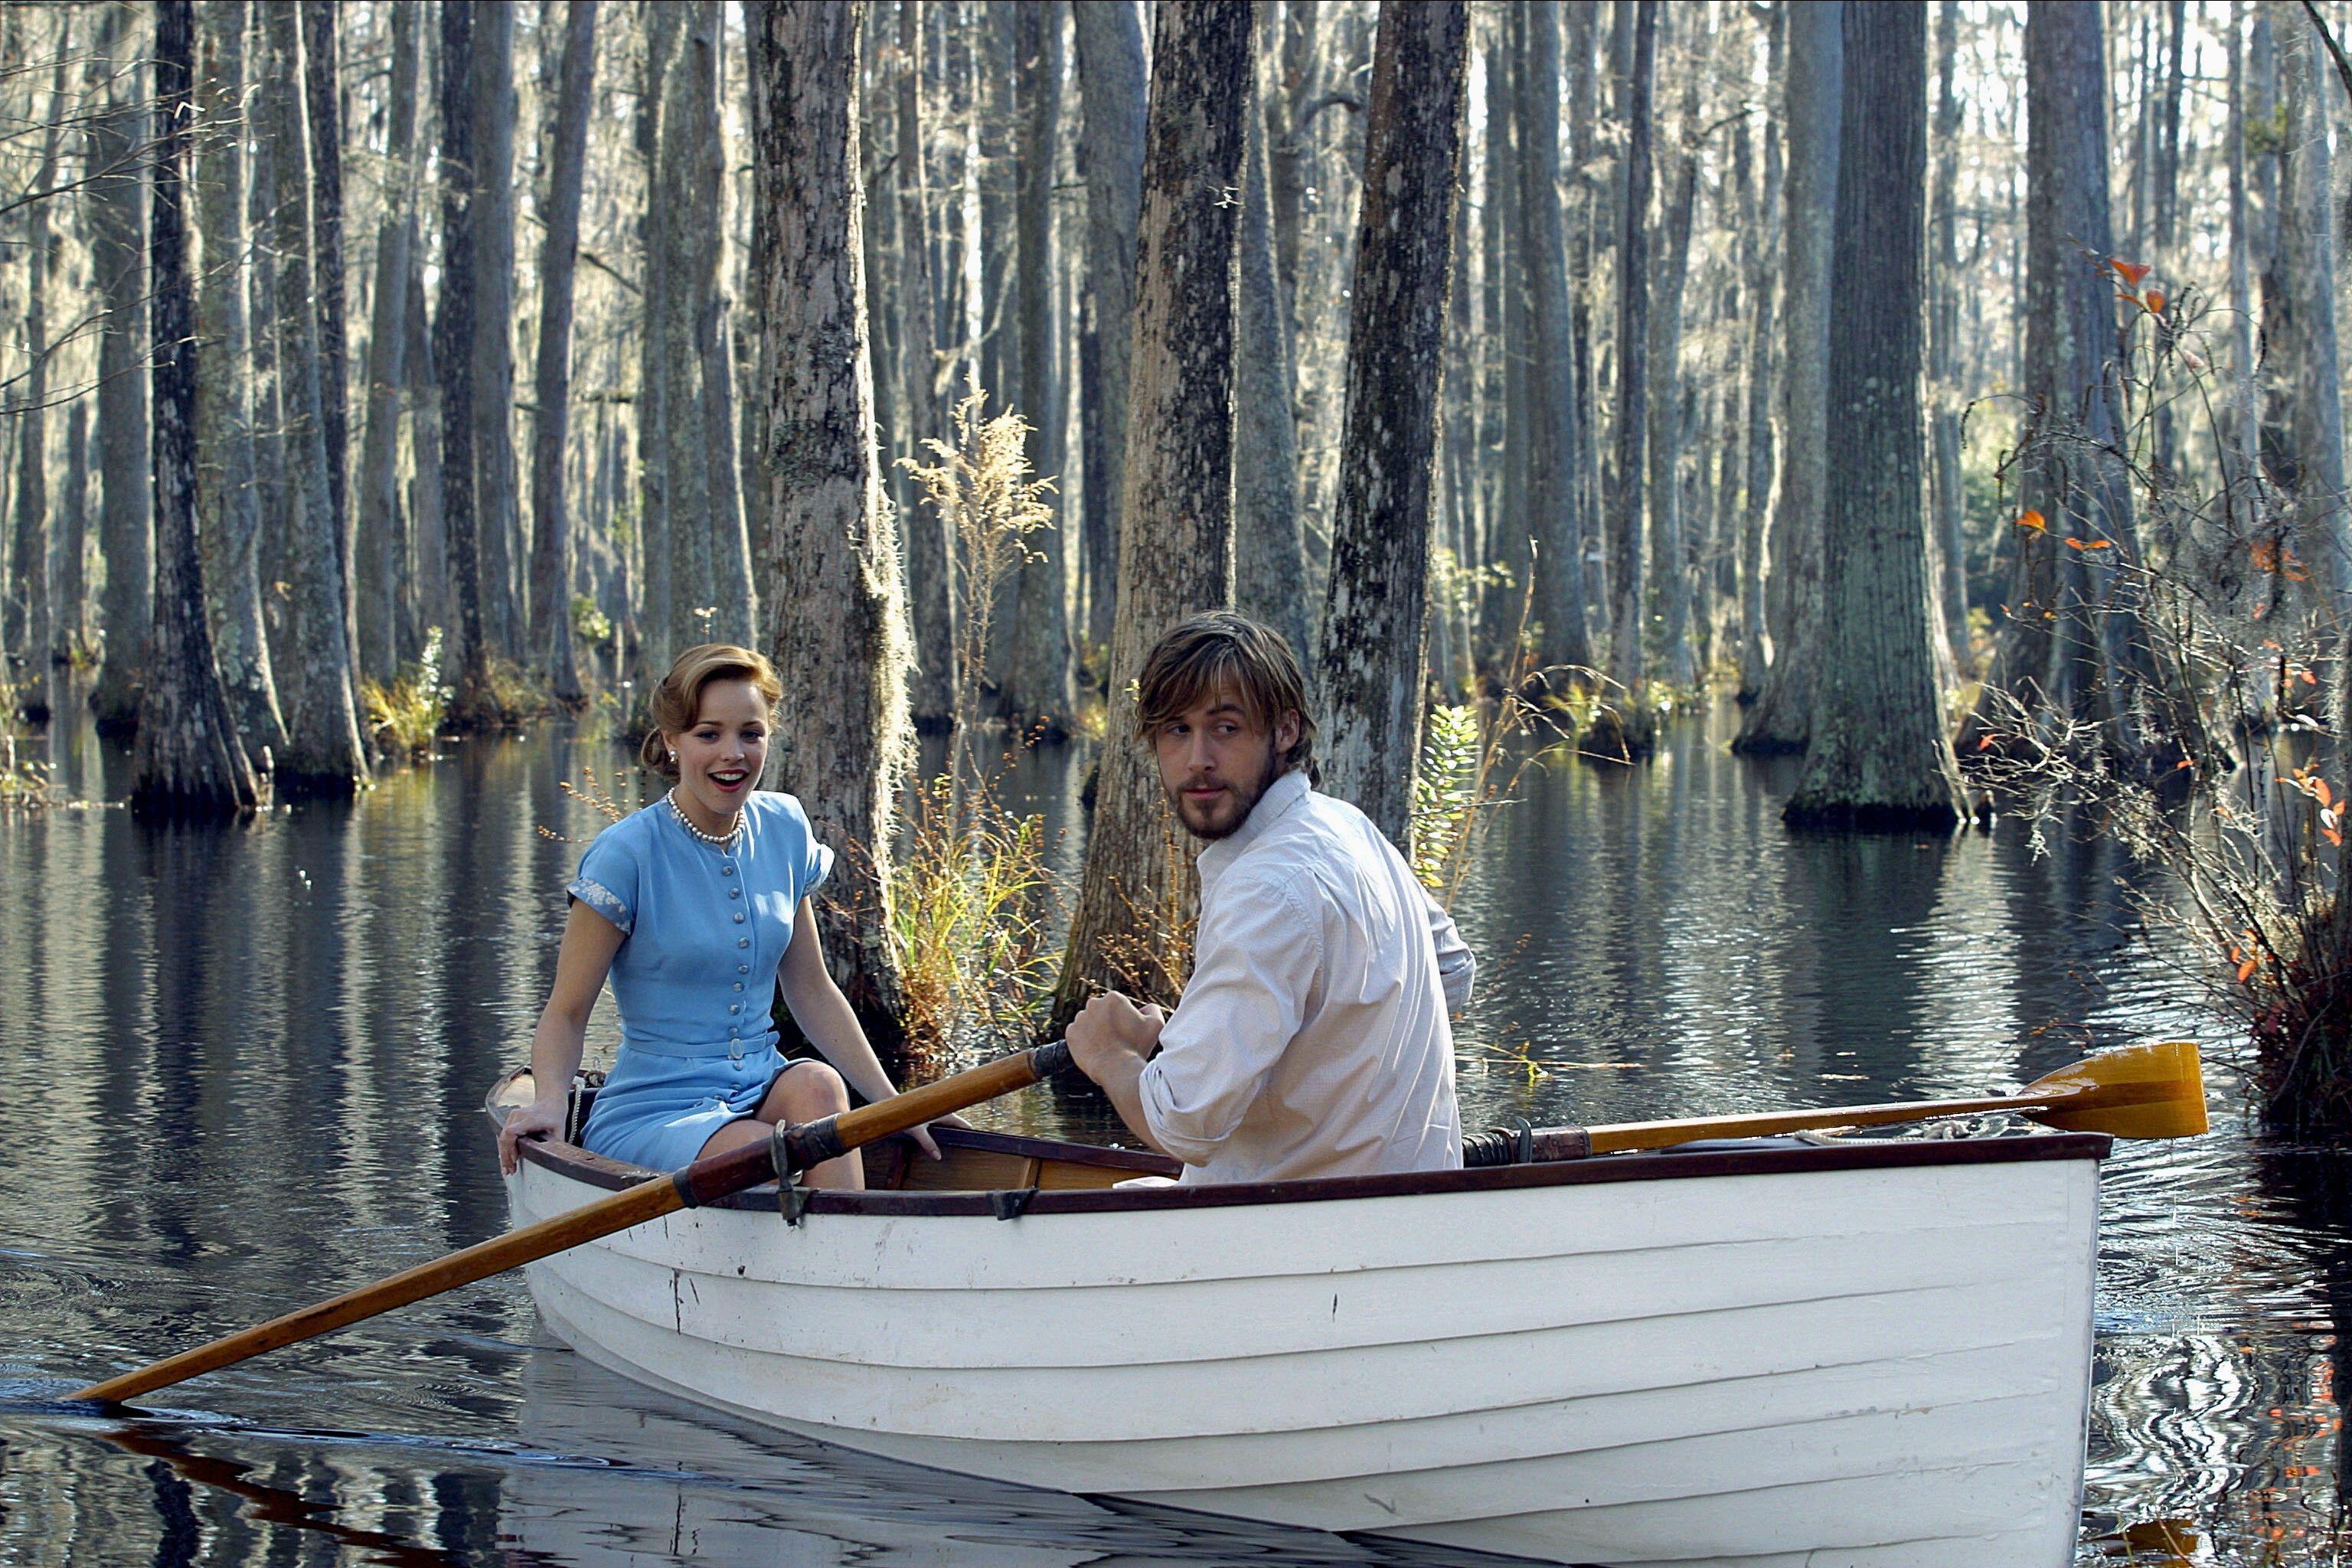 Noah and Allie share a romantic scene in the location